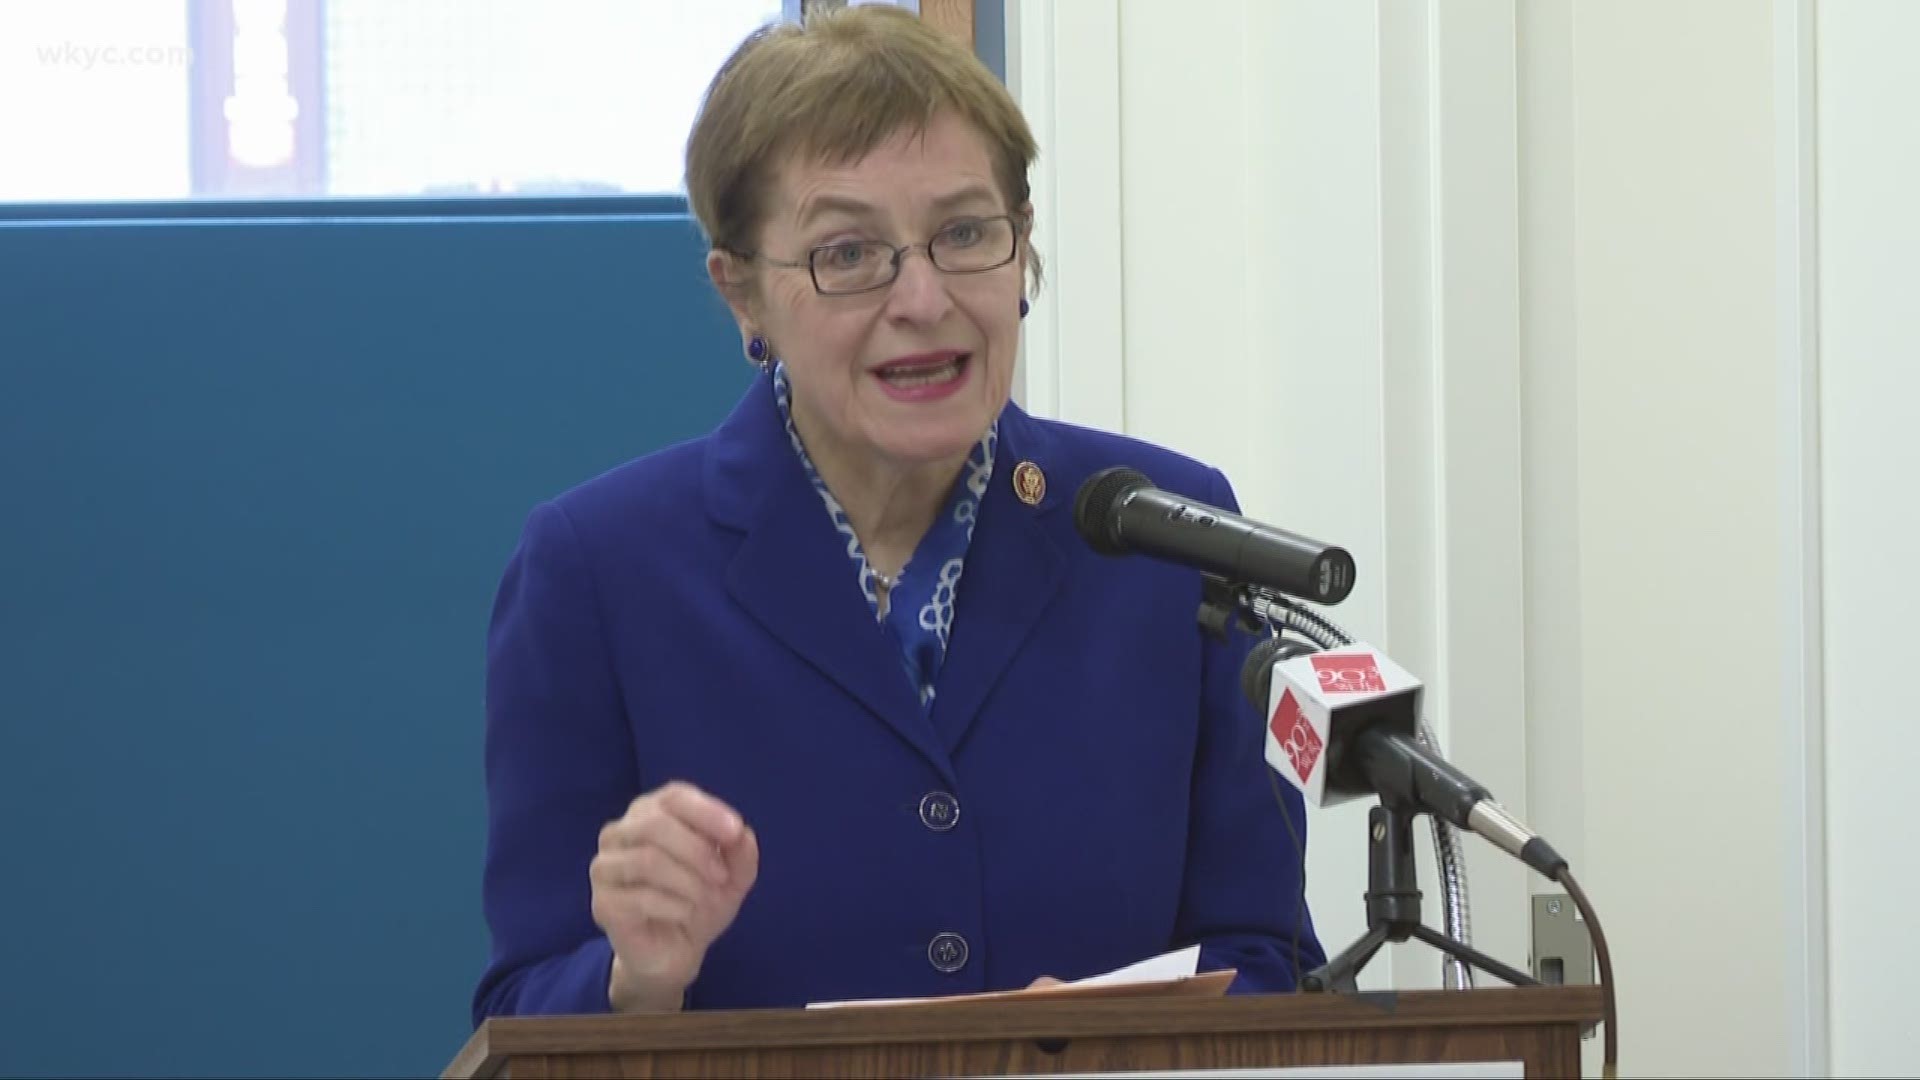 Rep. Marcy Kaptur, medical experts call on President Trump to reconsider locking in prescription costs